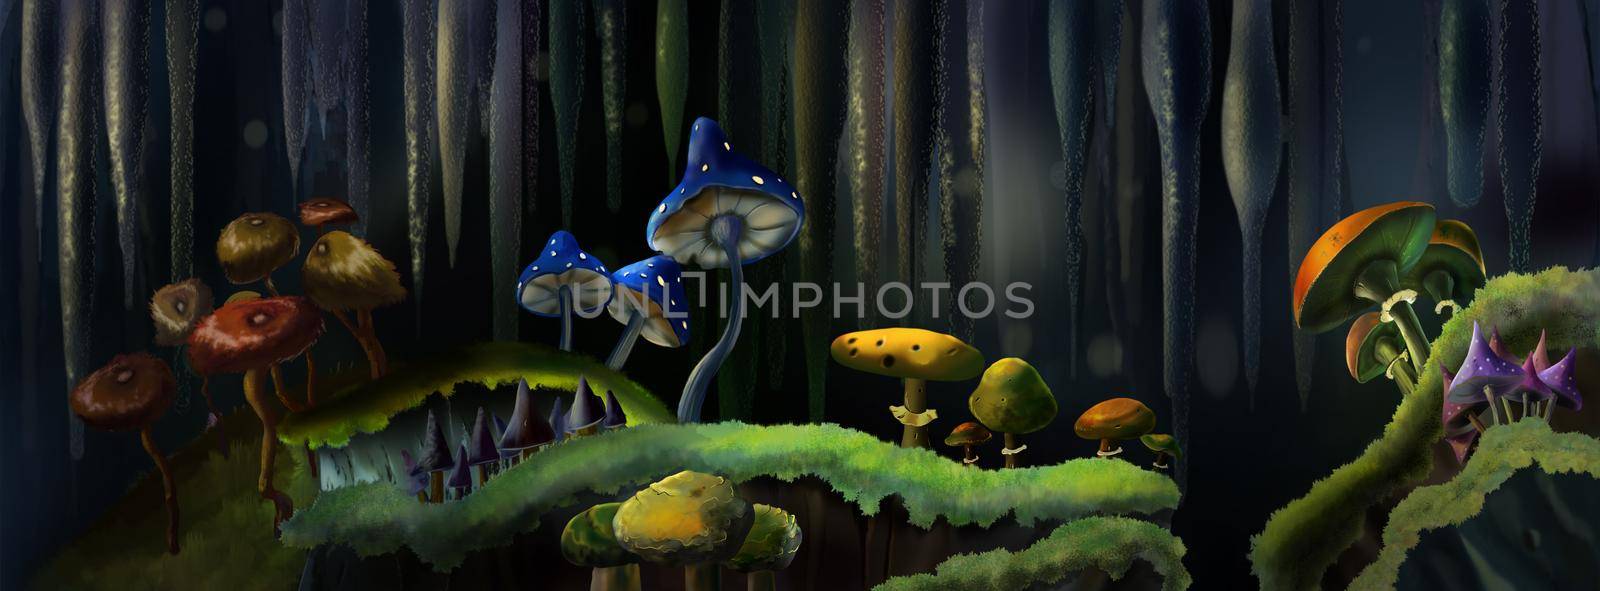 Magic mushrooms in a fairy tale cave. Digital Painting Background, Illustration.